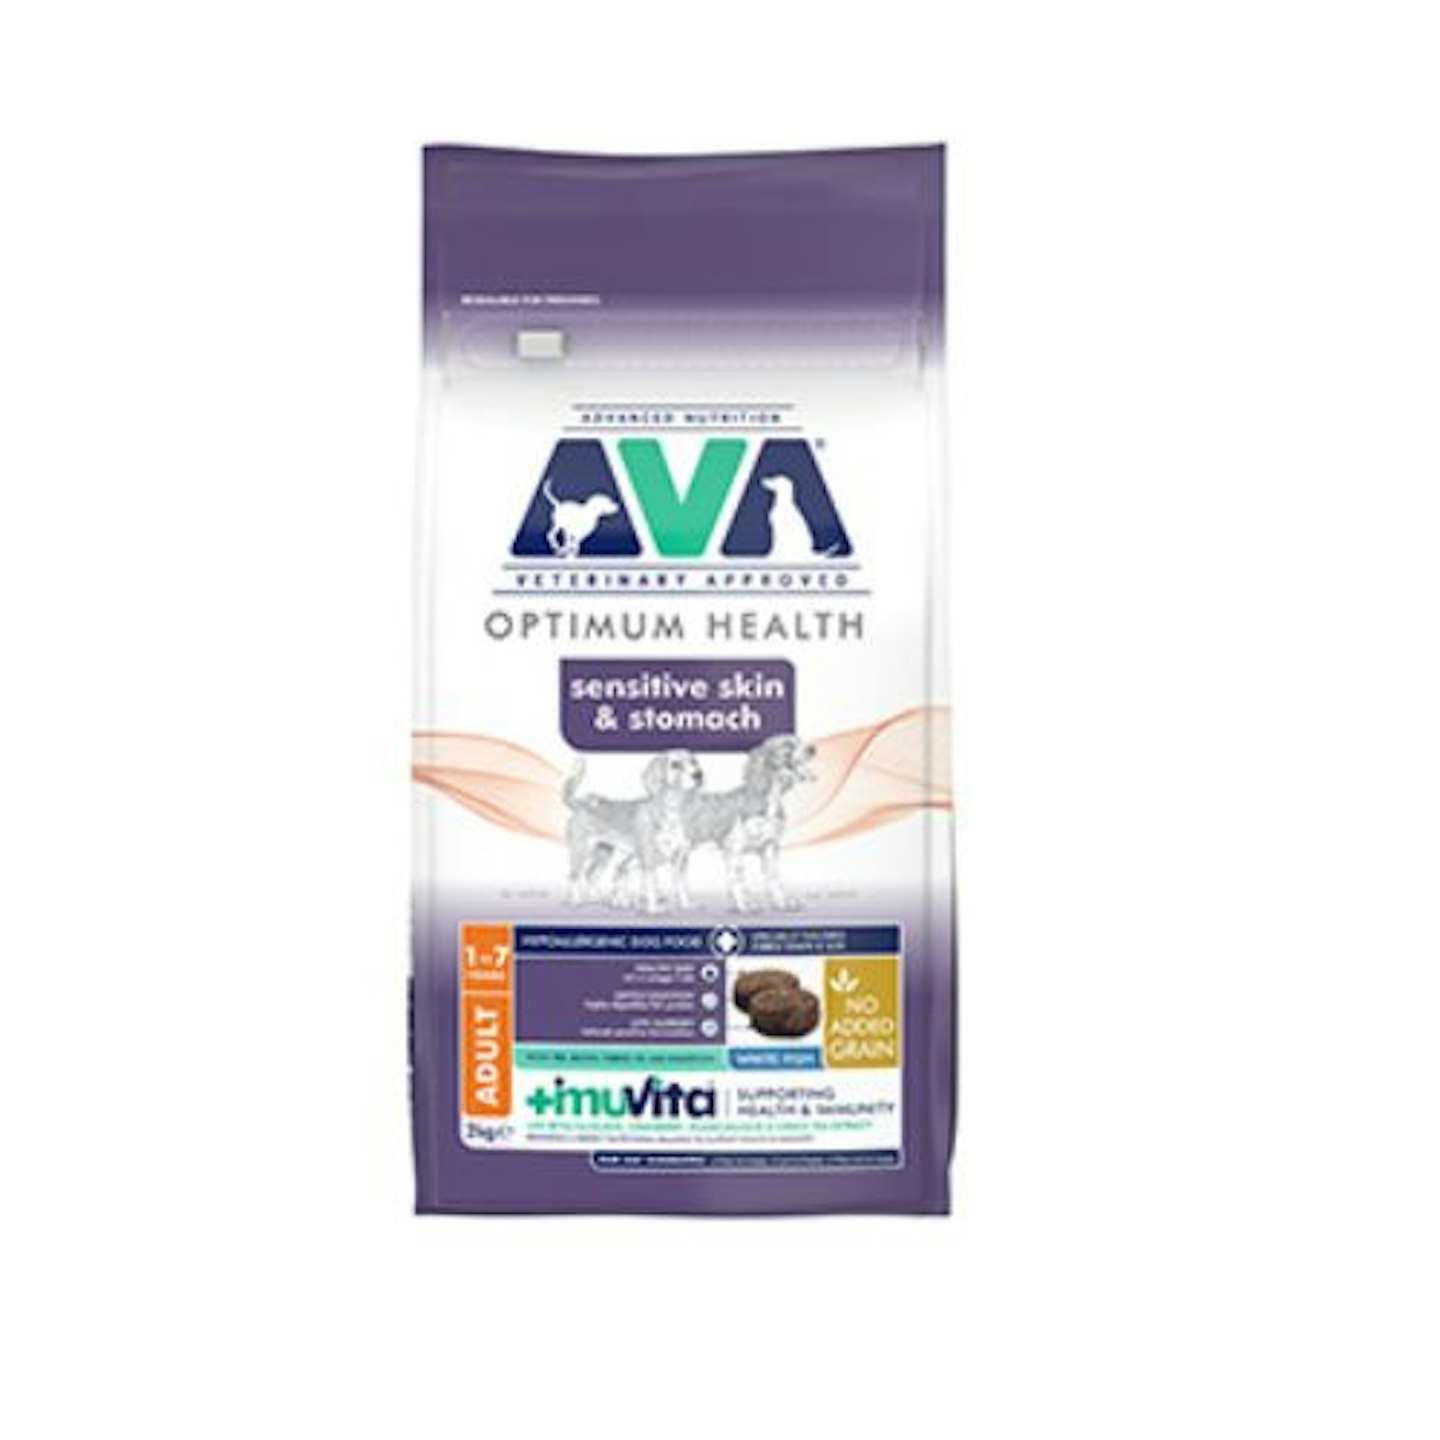 AVA Veterinary Approved Optimum Health Sensitive Skin and Stomach Dog Food